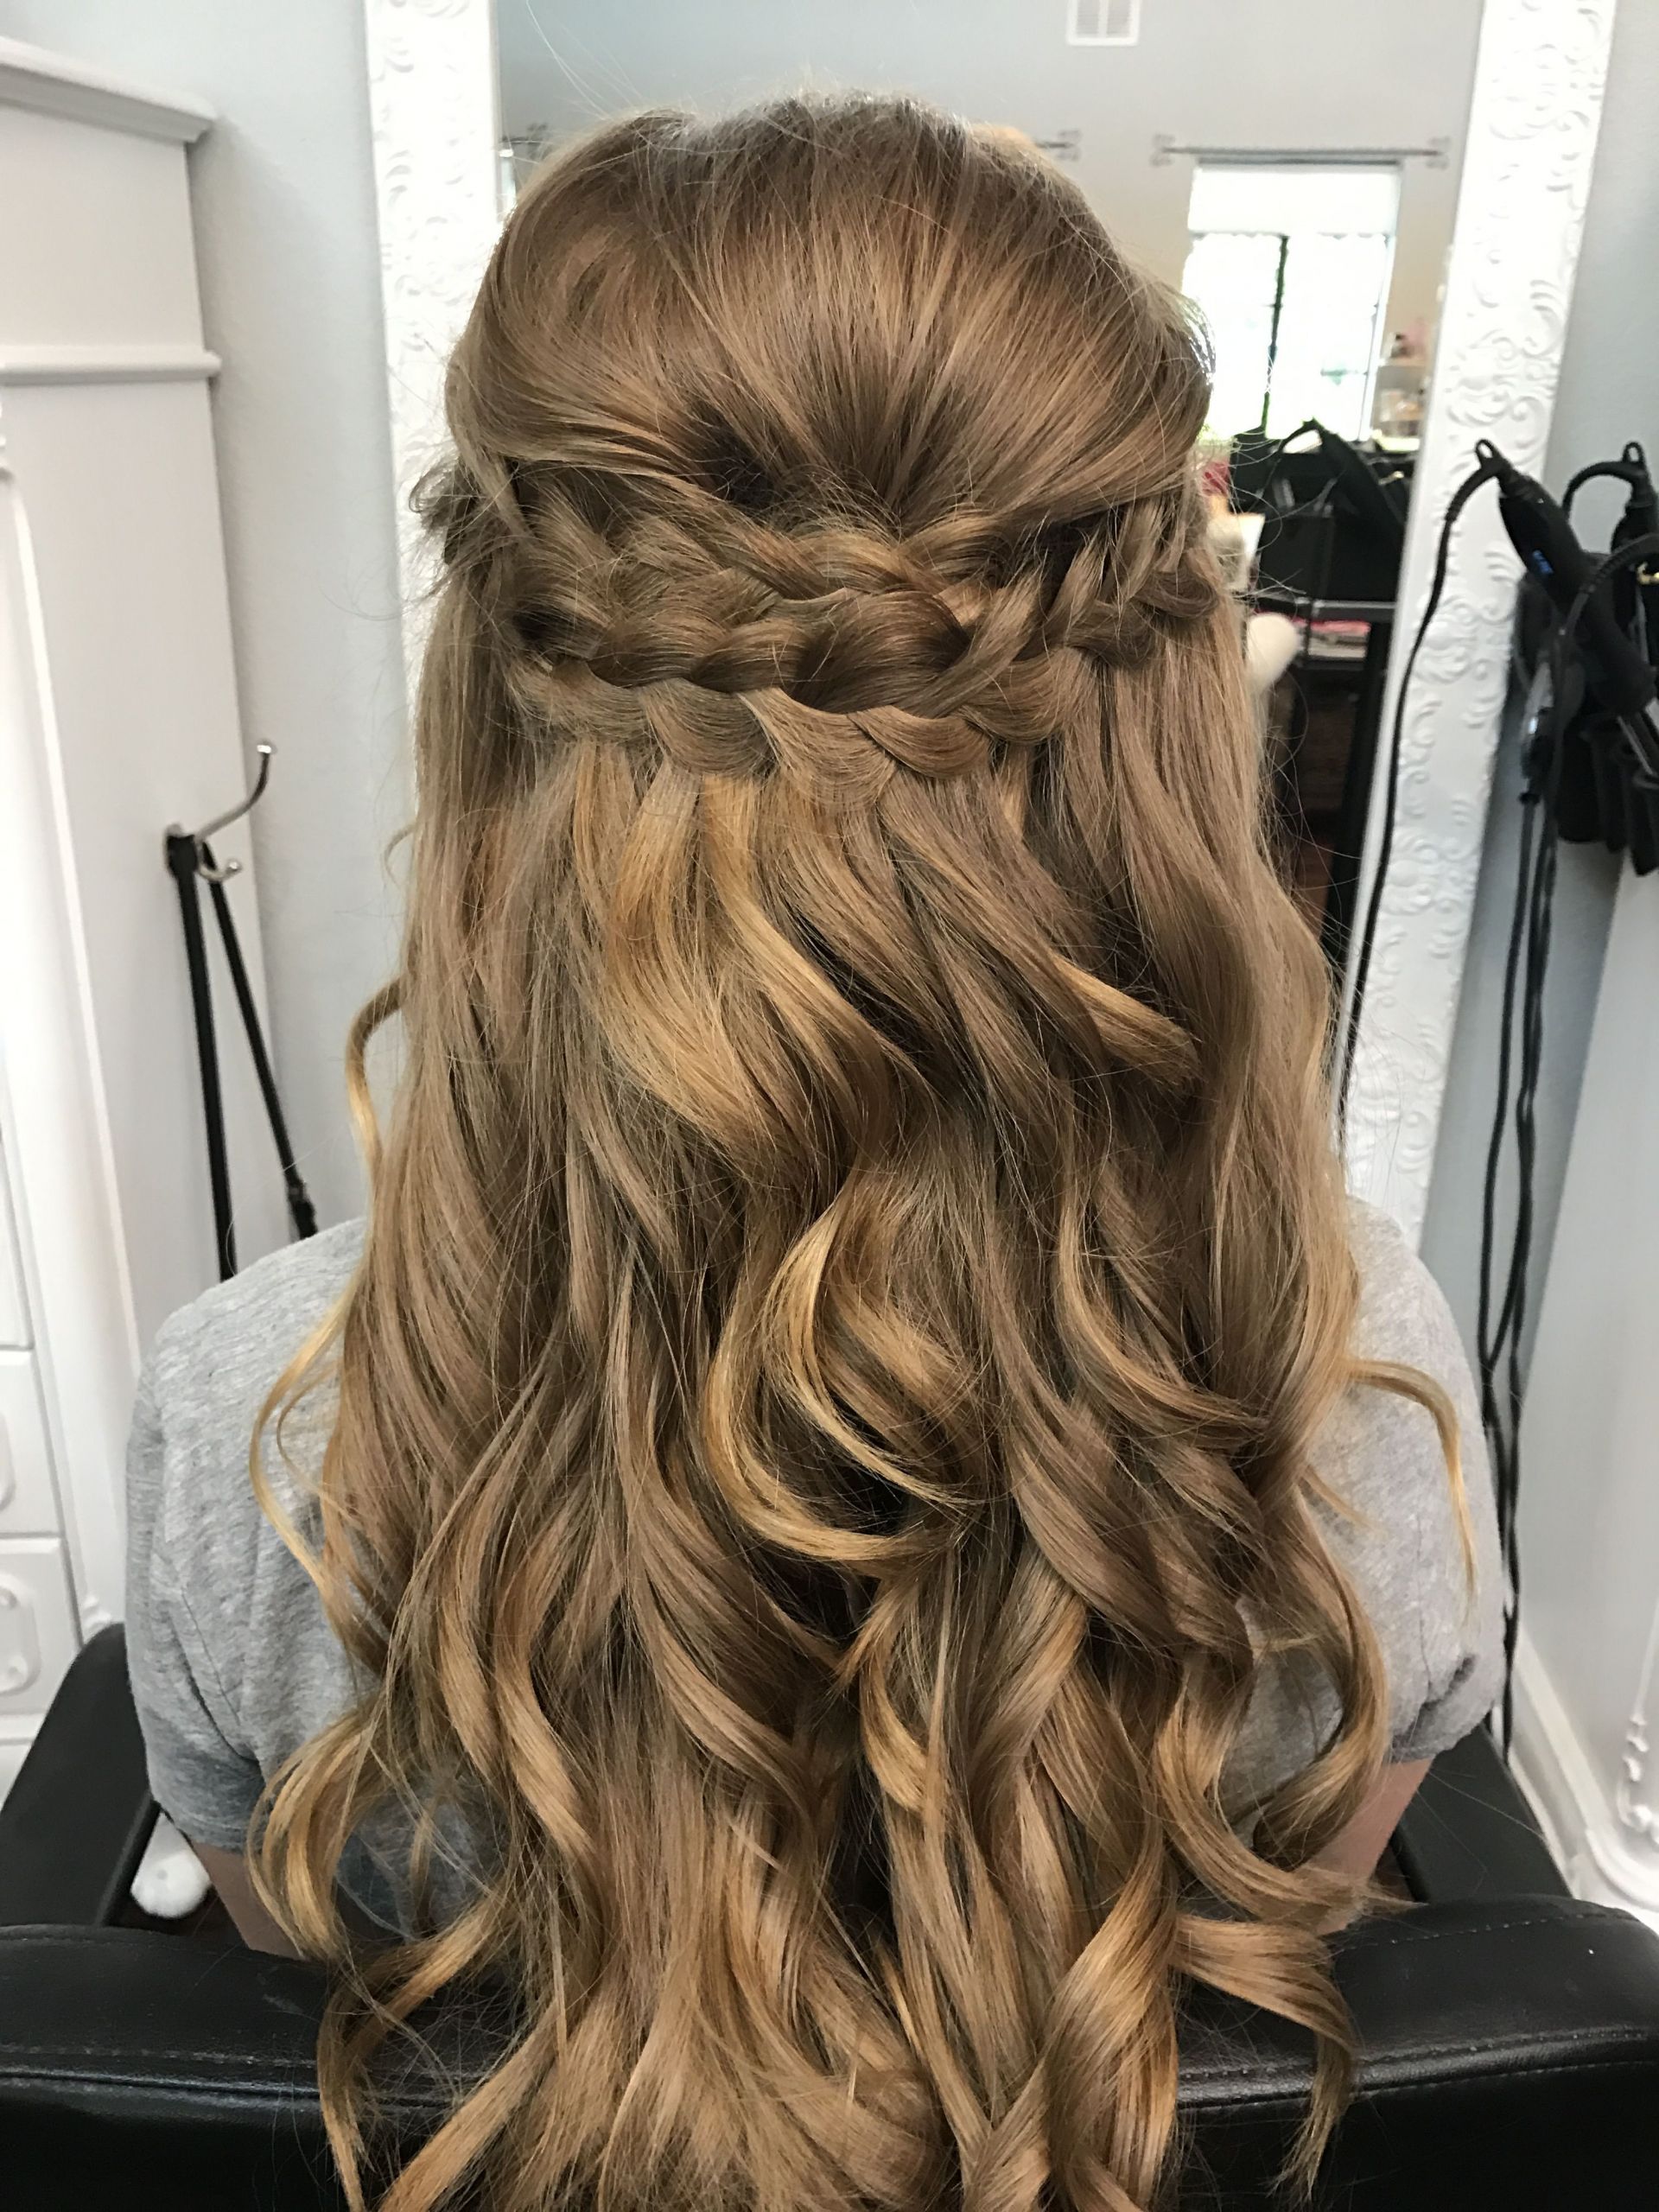 Prom Hairstyles Down
 Braided half up half down prom hair